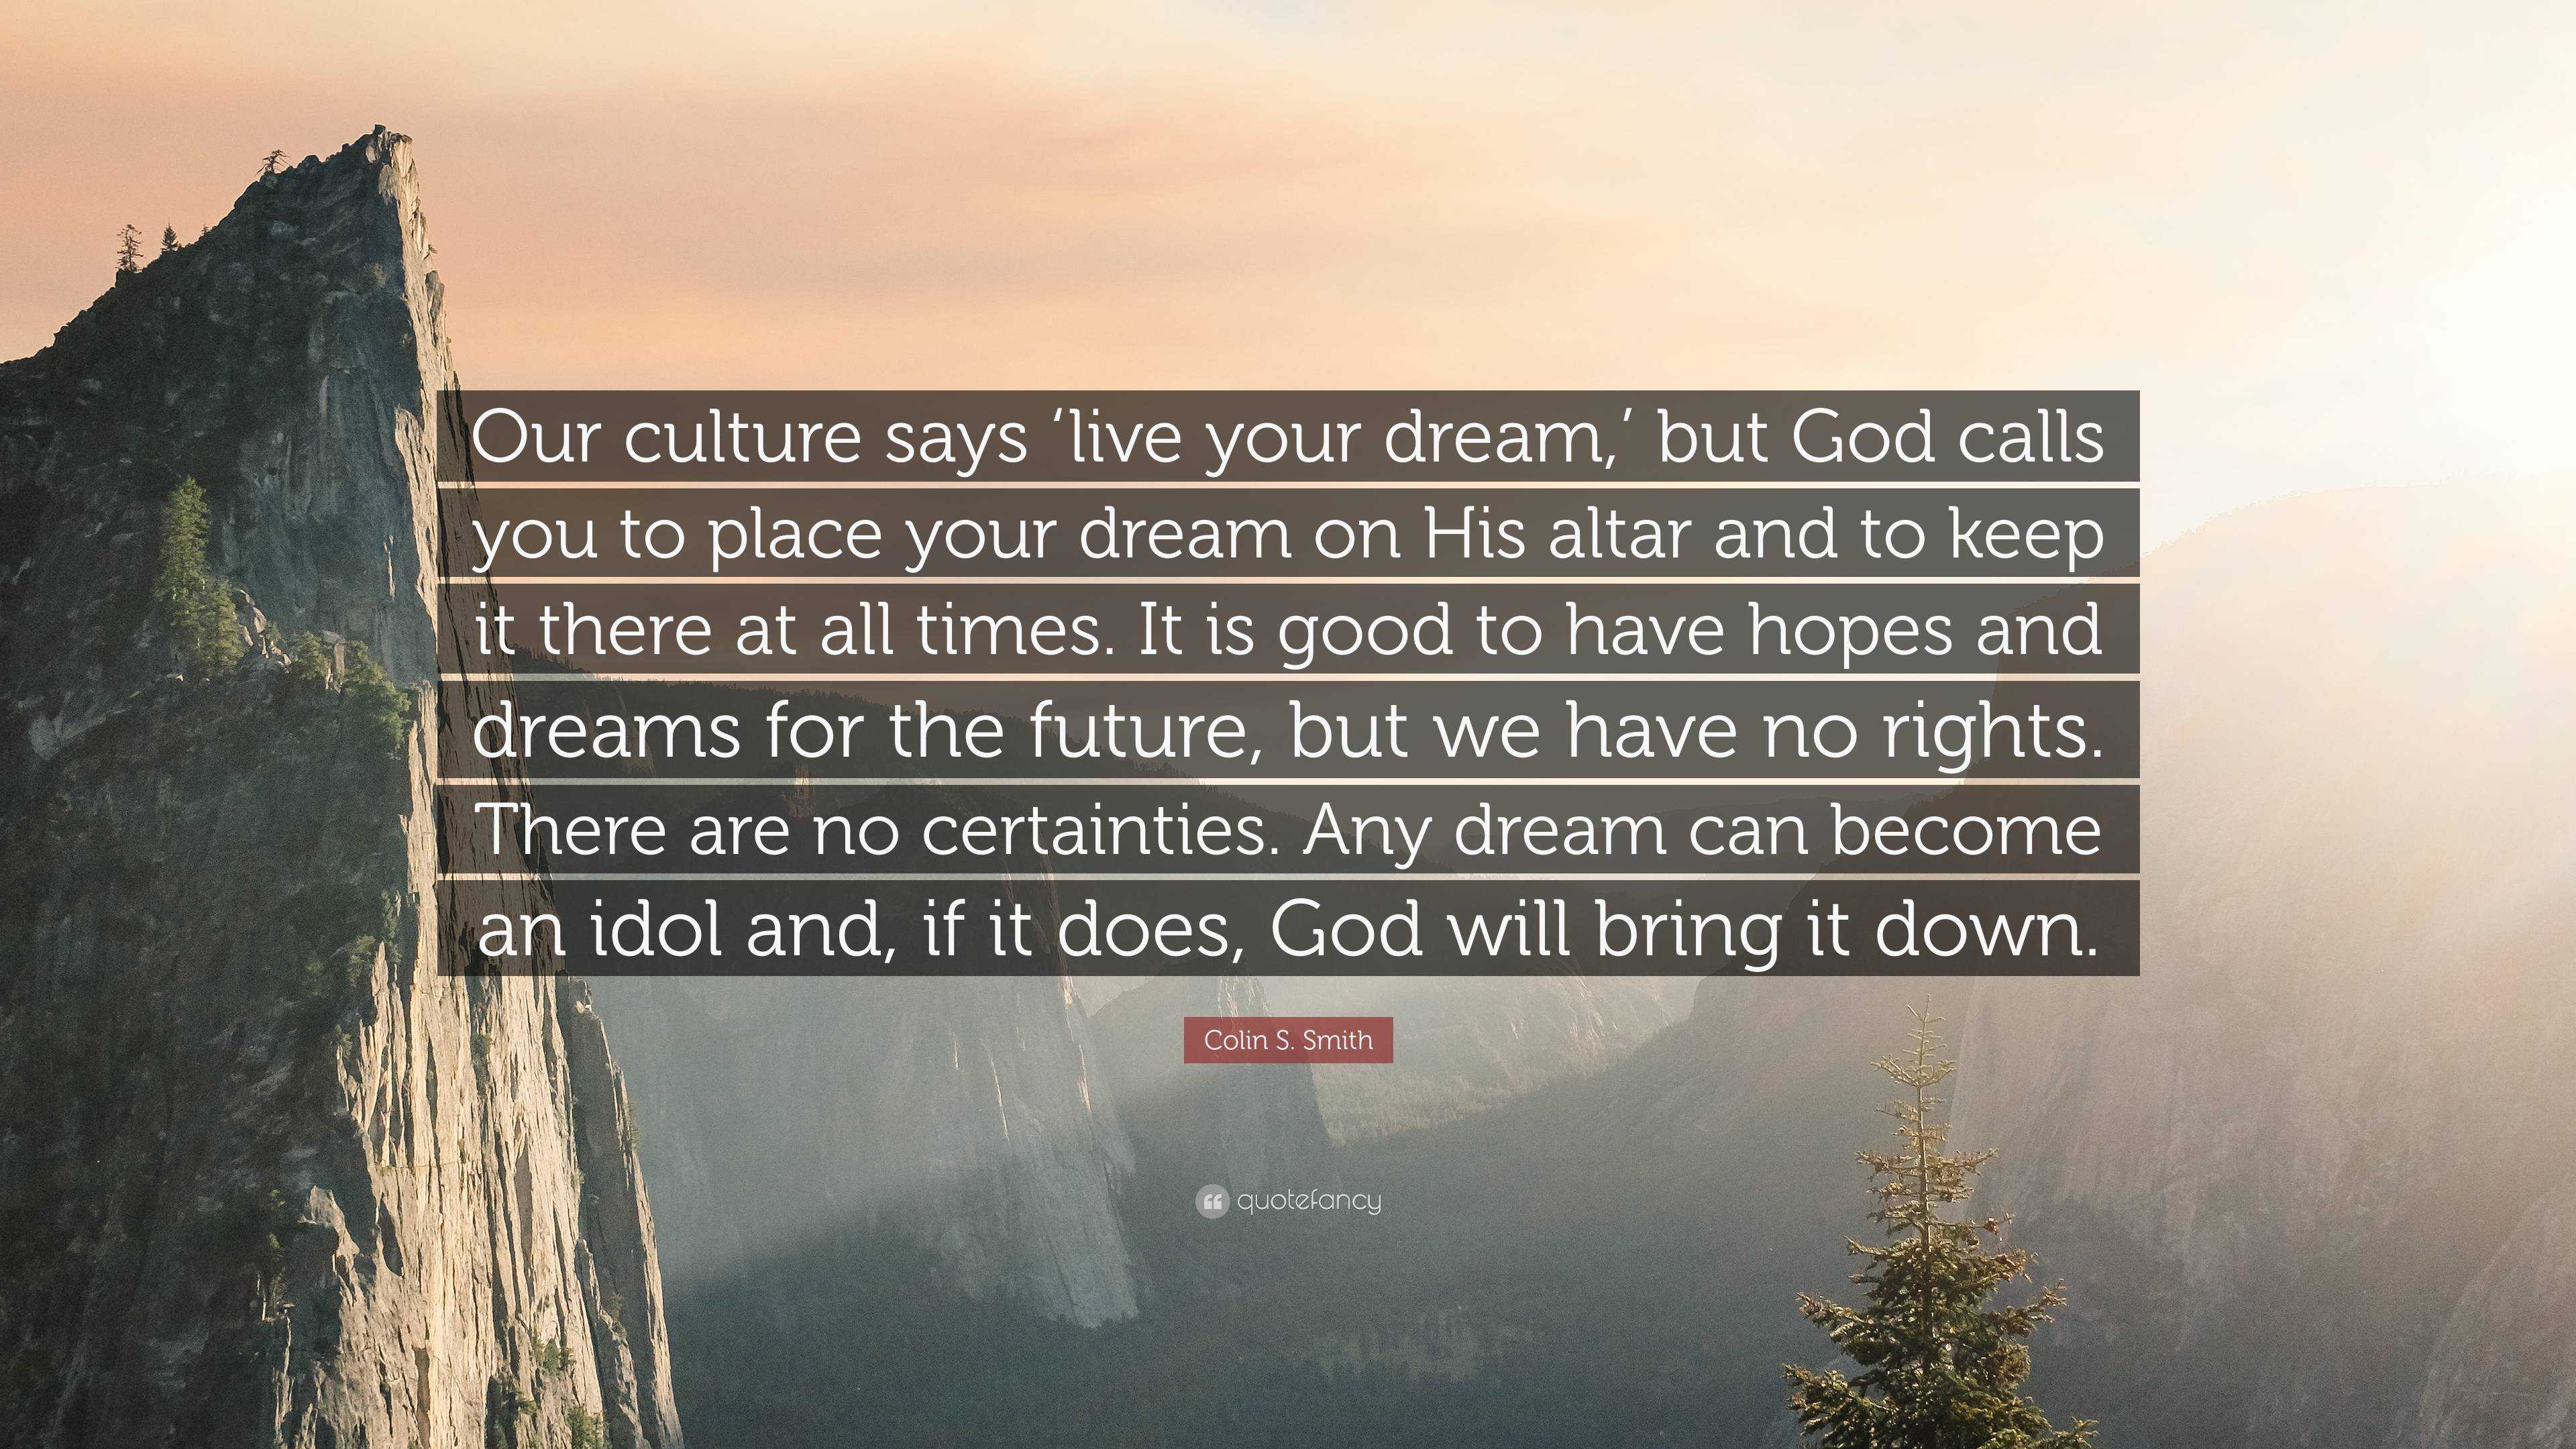 Colin S. Smith Quote: “Our culture says 'live your dream,' but God calls  you to place your dream on His altar and to keep it there at all times”